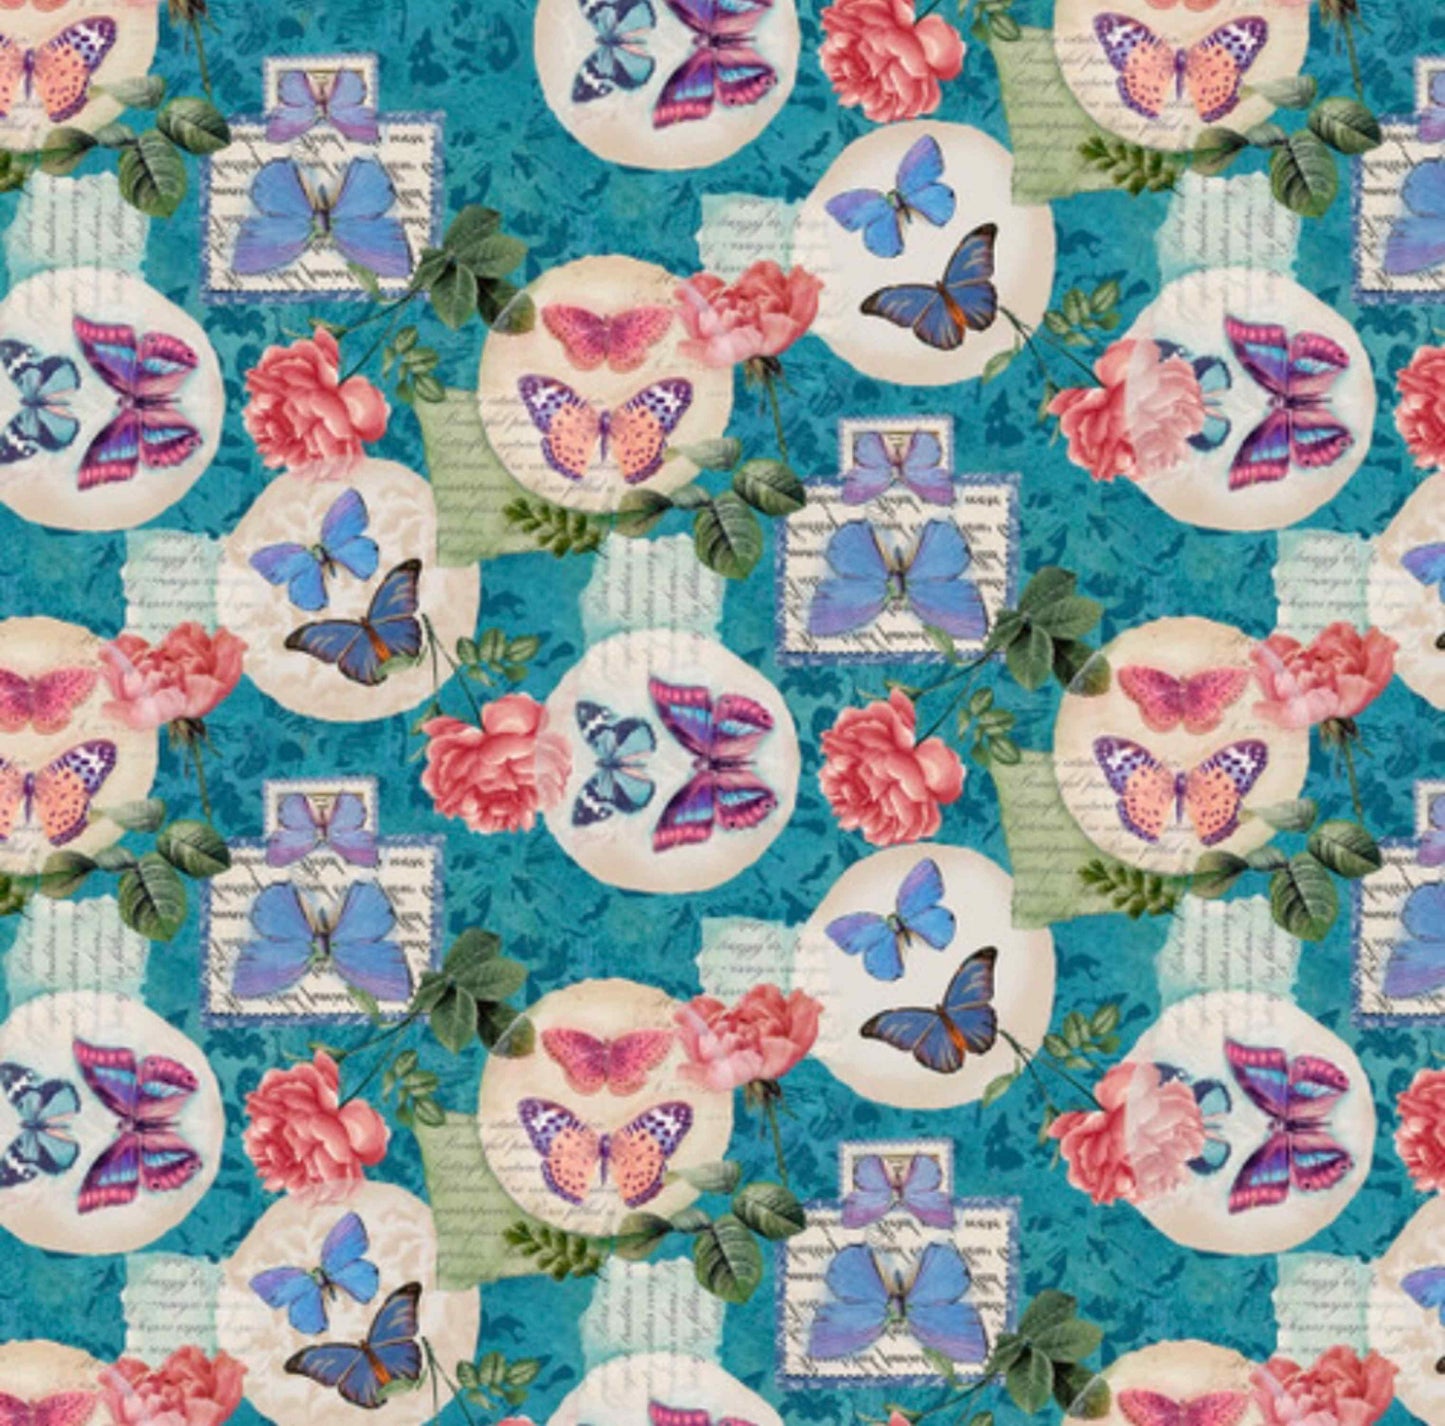 Fabric By The Yard - Victoria, Butterfly and Floral Stamp | 2435-76 Teal | Blank Quilting